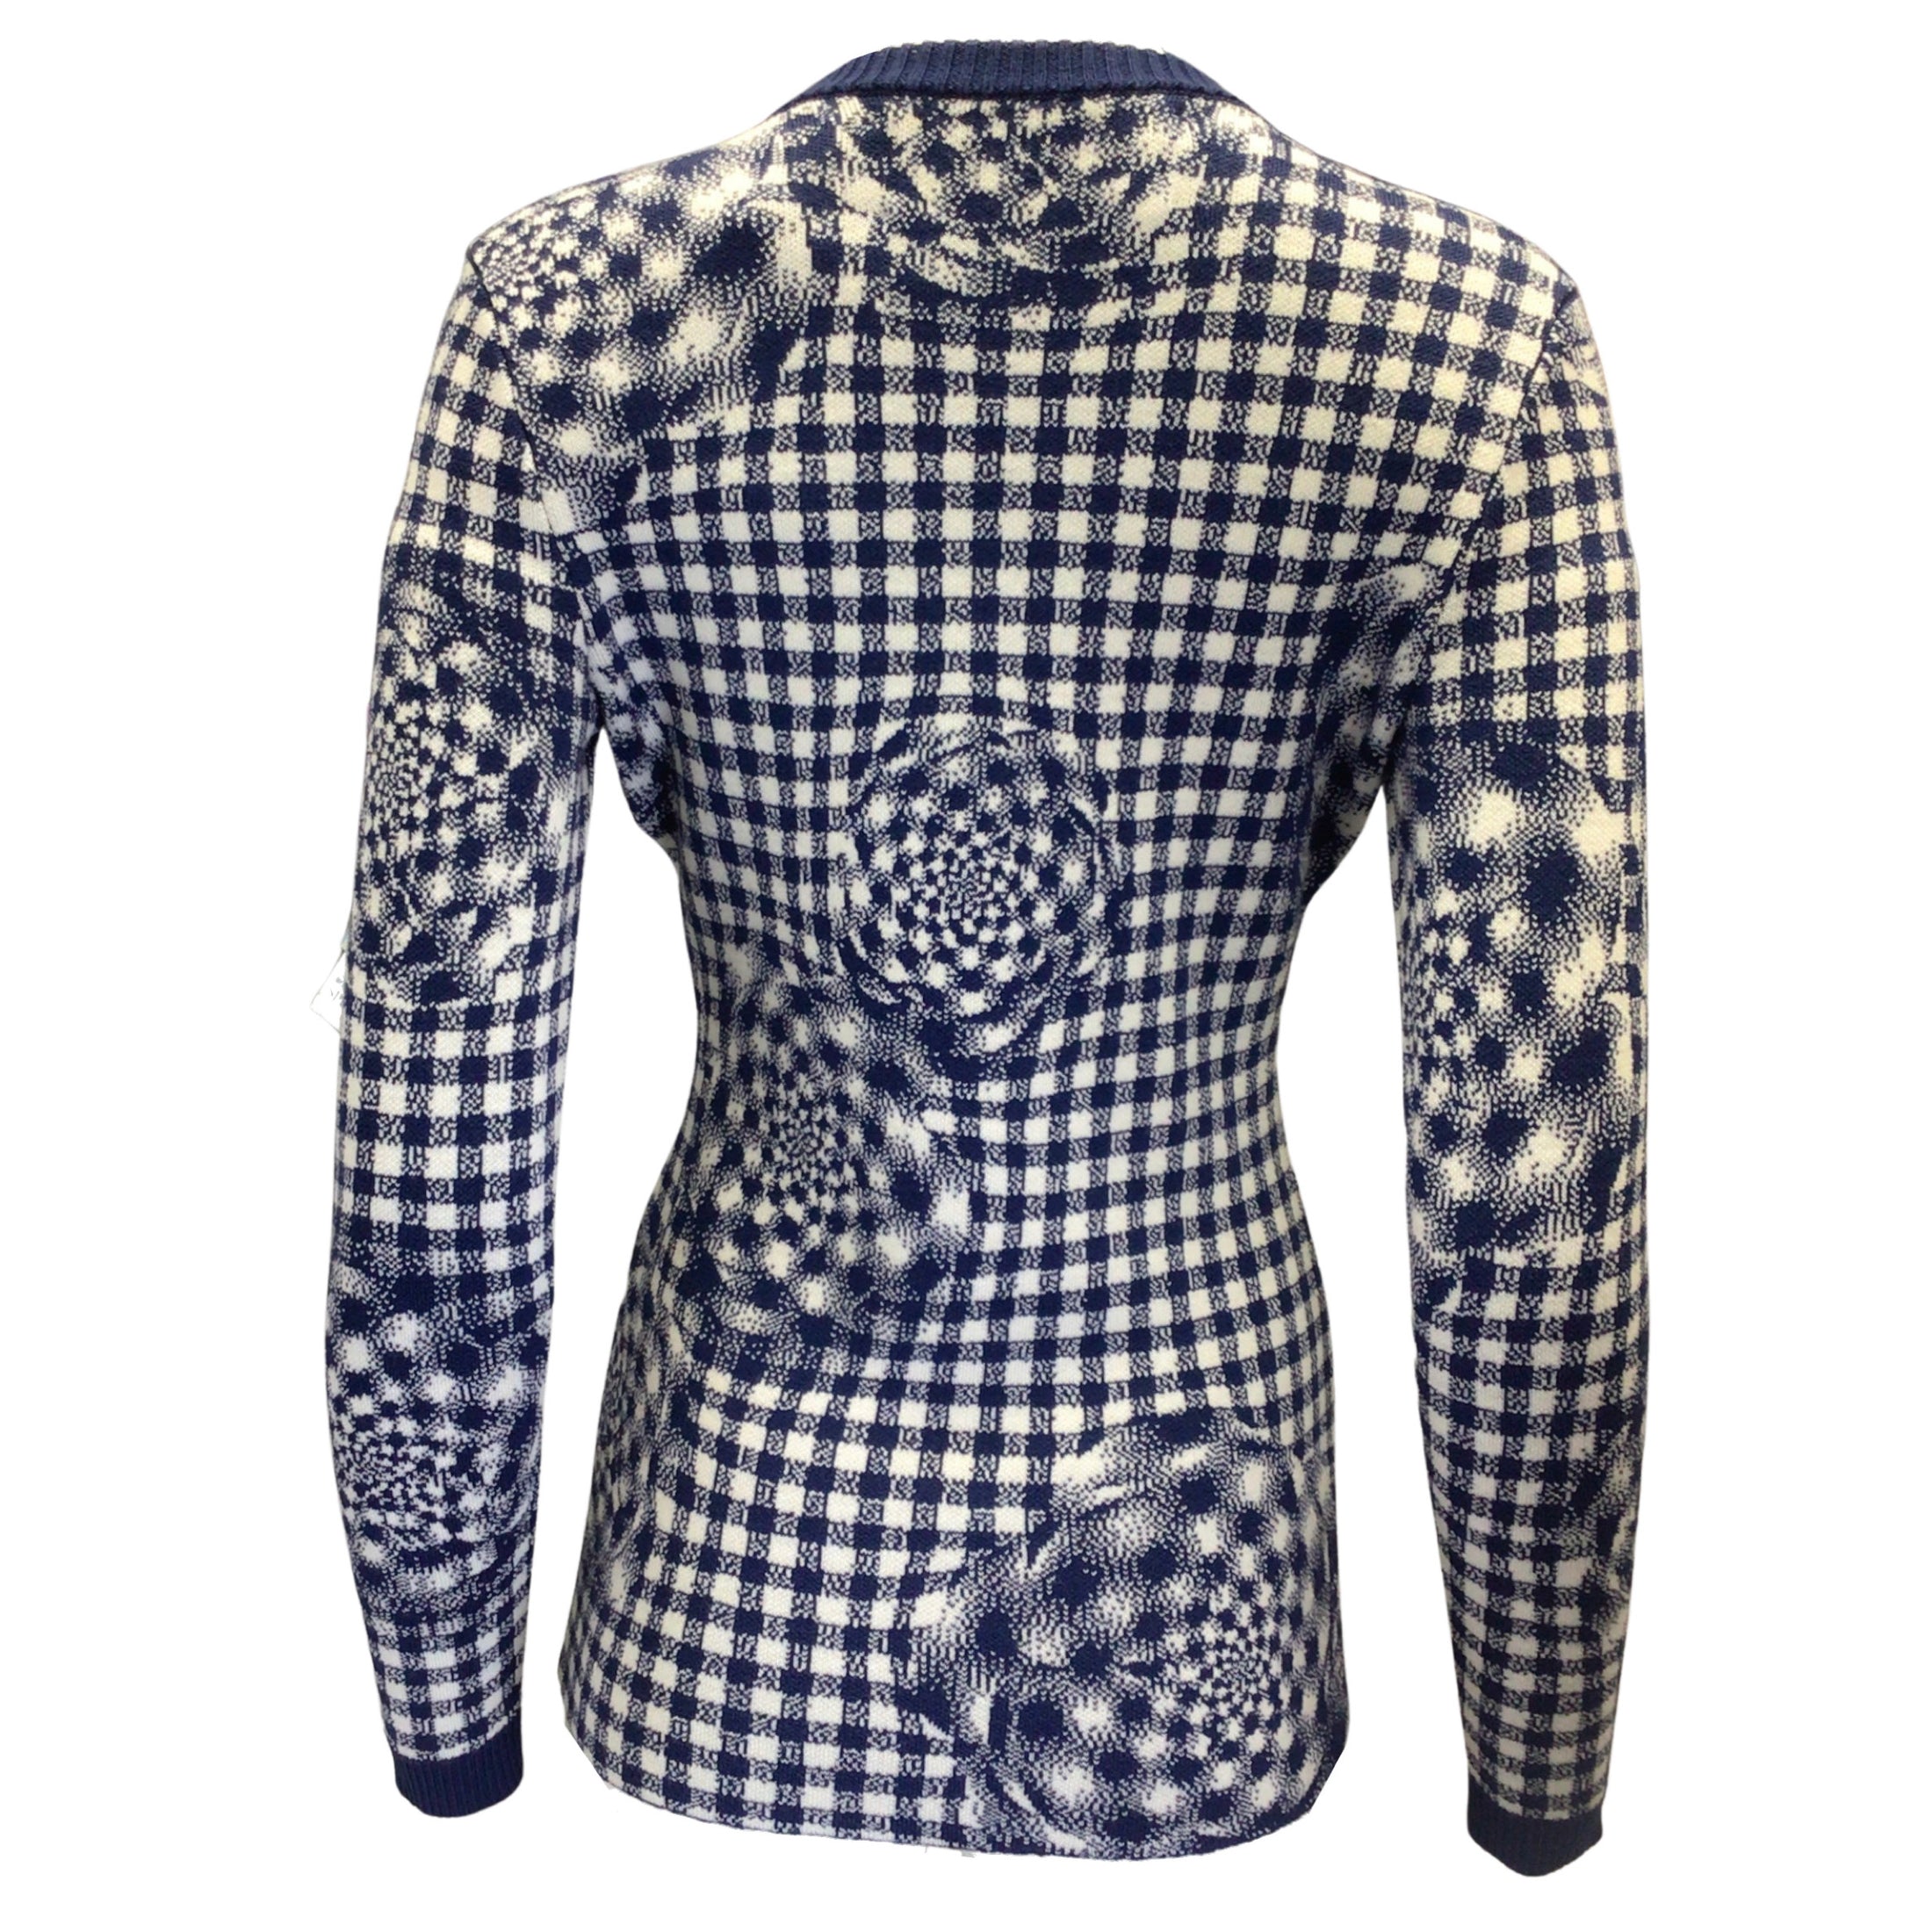 Brandon Maxwell Navy Blue / White Floral Gingham Long Sleeved Wool Crewneck Sweater